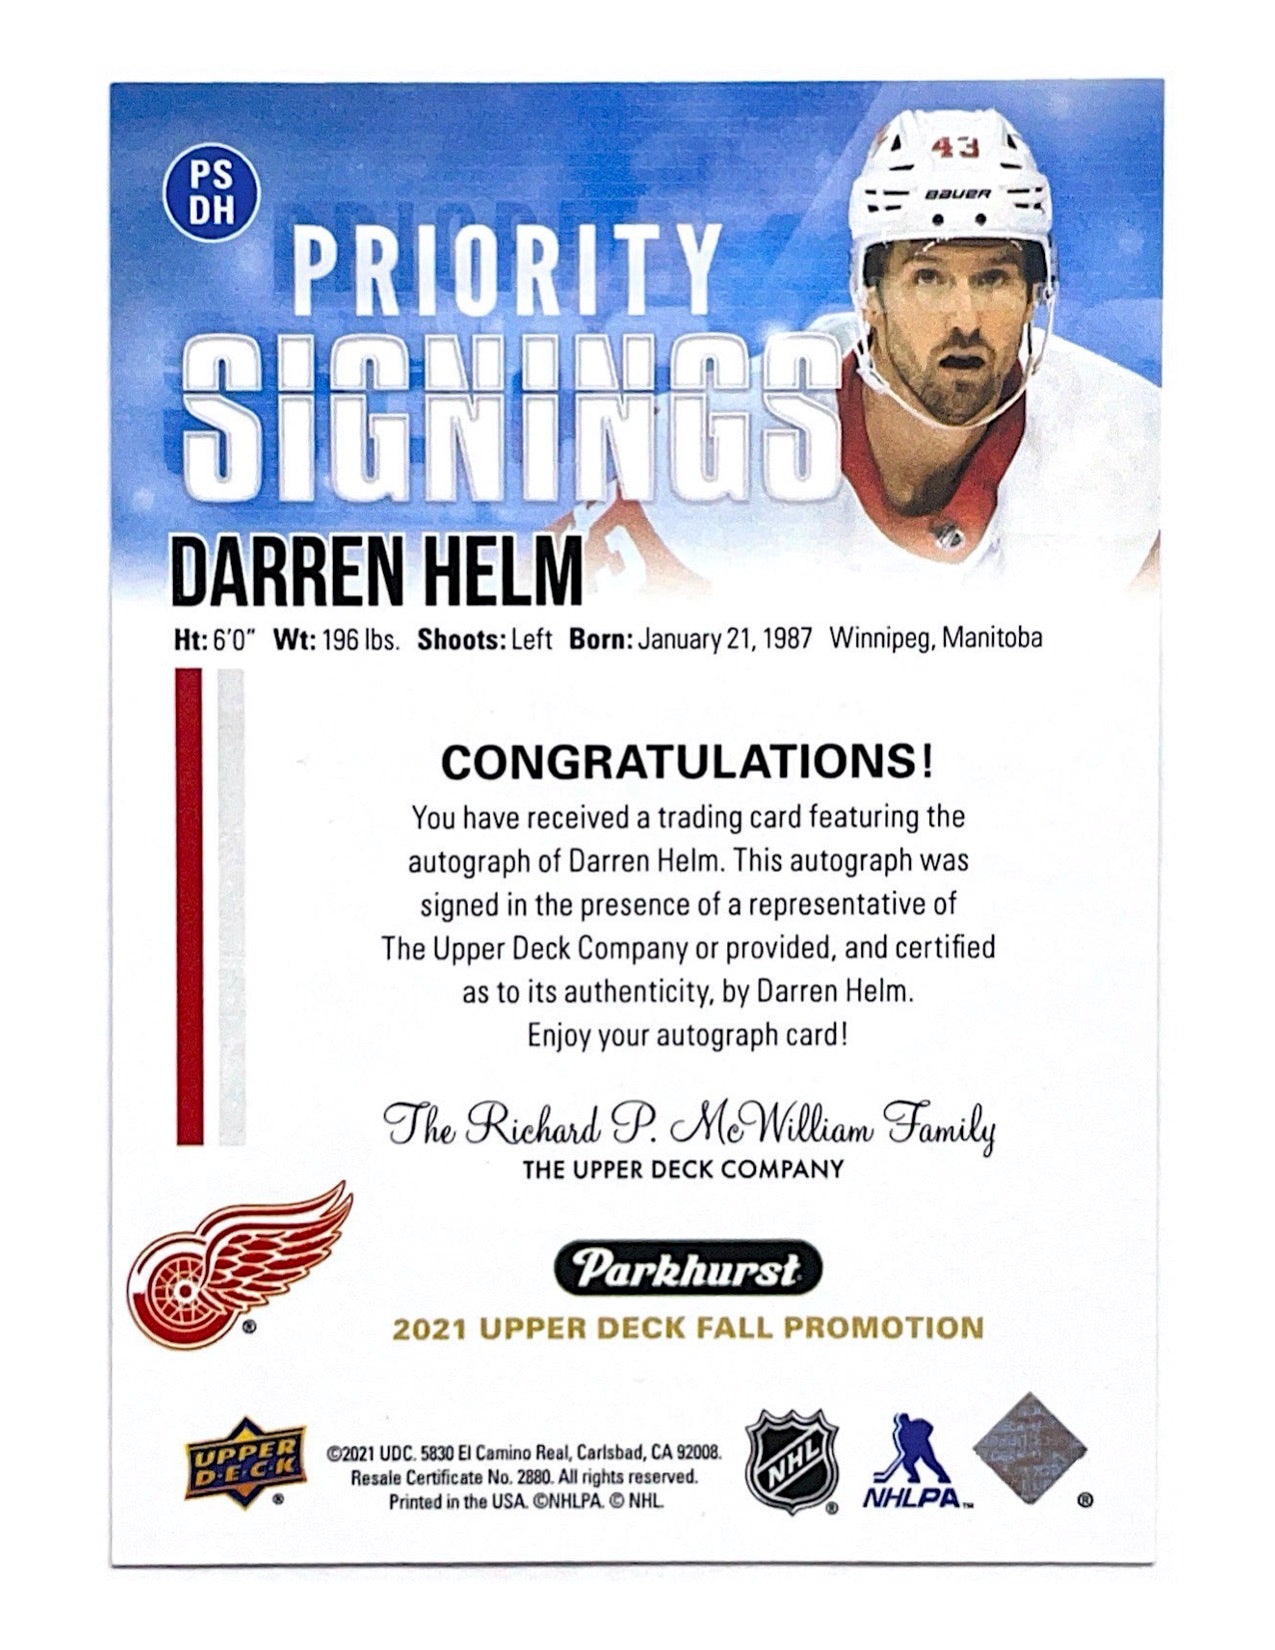 Darren Helm 2020-21 Upper Deck Fall Promotion Parkhurst Priority Signings #PS-DH - 14/50